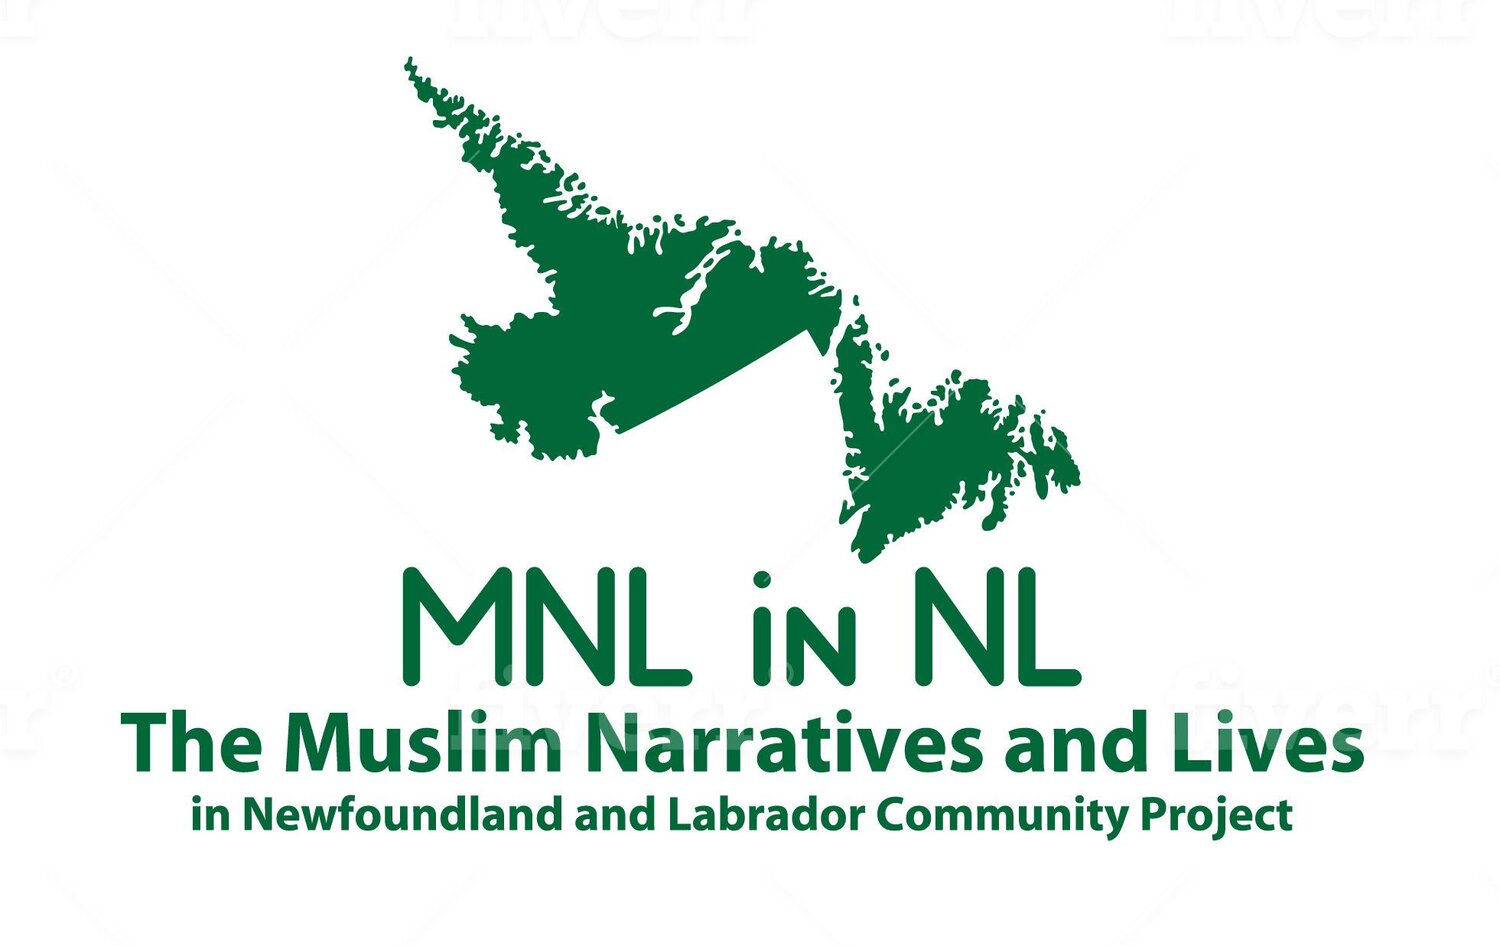 The Muslim Narratives and Lives in Newfoundland and Labrador Community Project